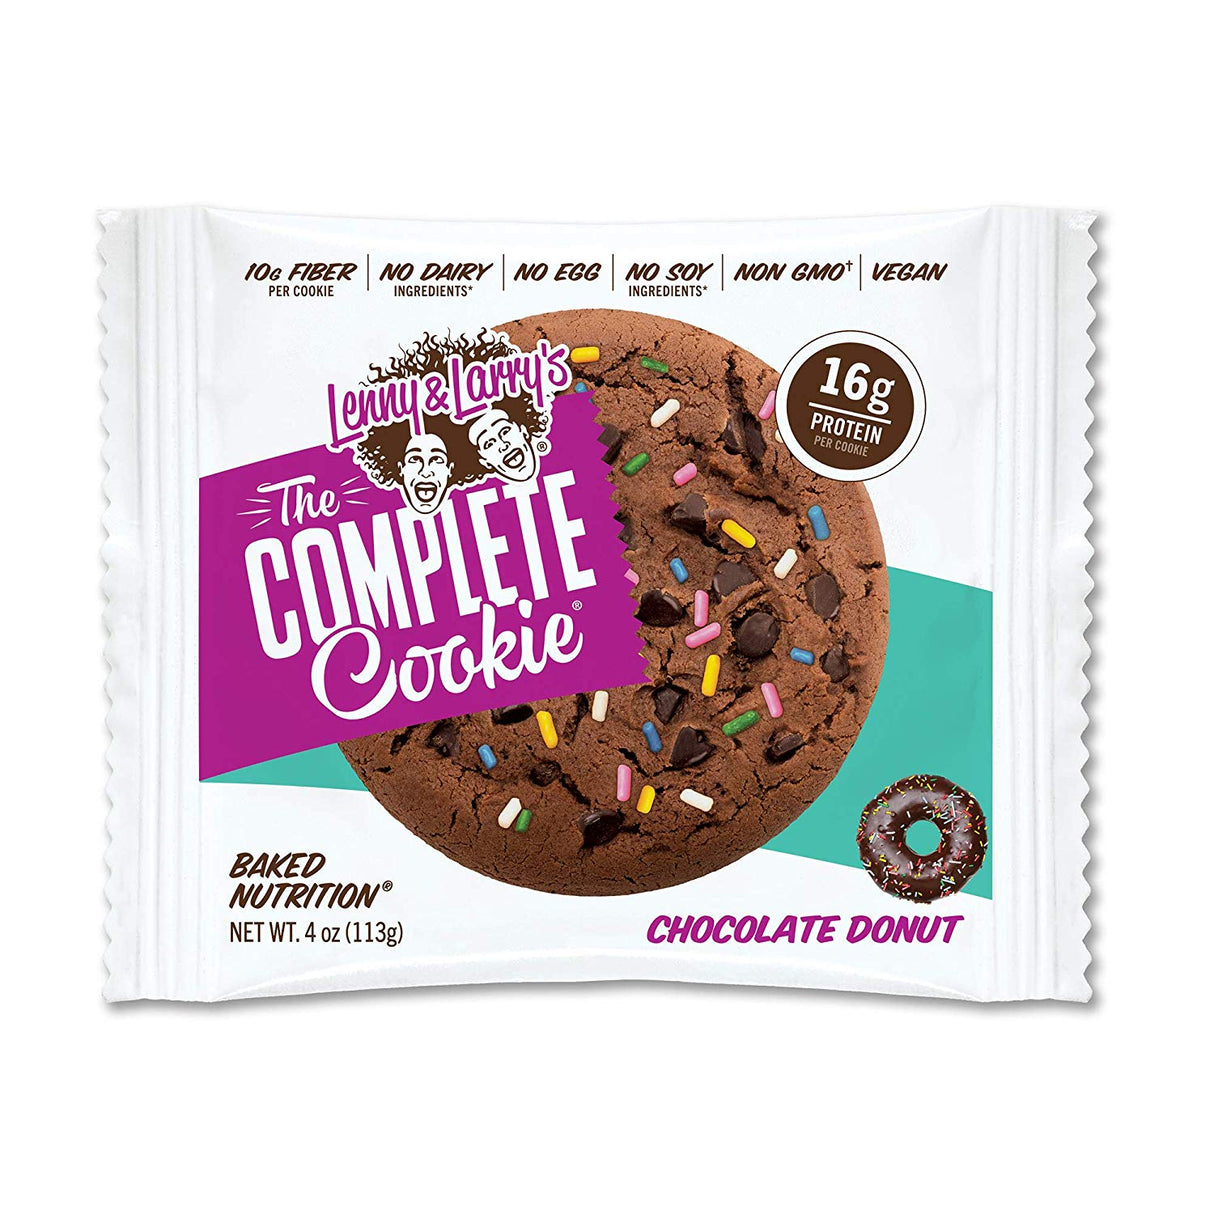 The Complete Cookie 113g Chocolate Donut